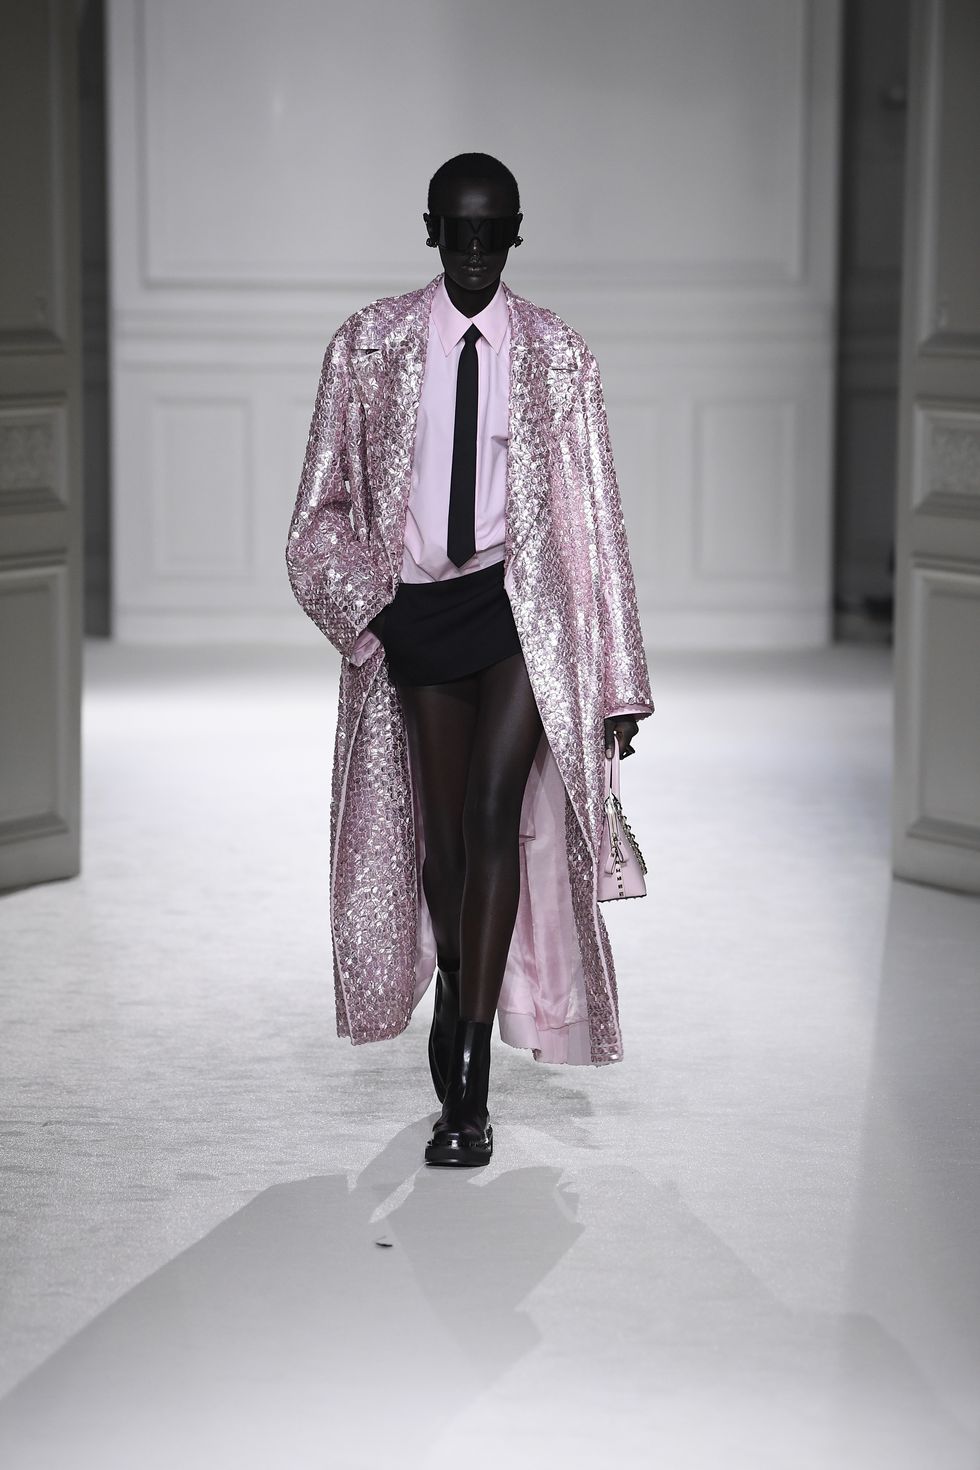 model on the runway at valentino fall 2023 ready to wear fashion show on march 5, 2023 at hotel salomon de rothschild in paris, france photo by giovanni giannoniwwd via getty images